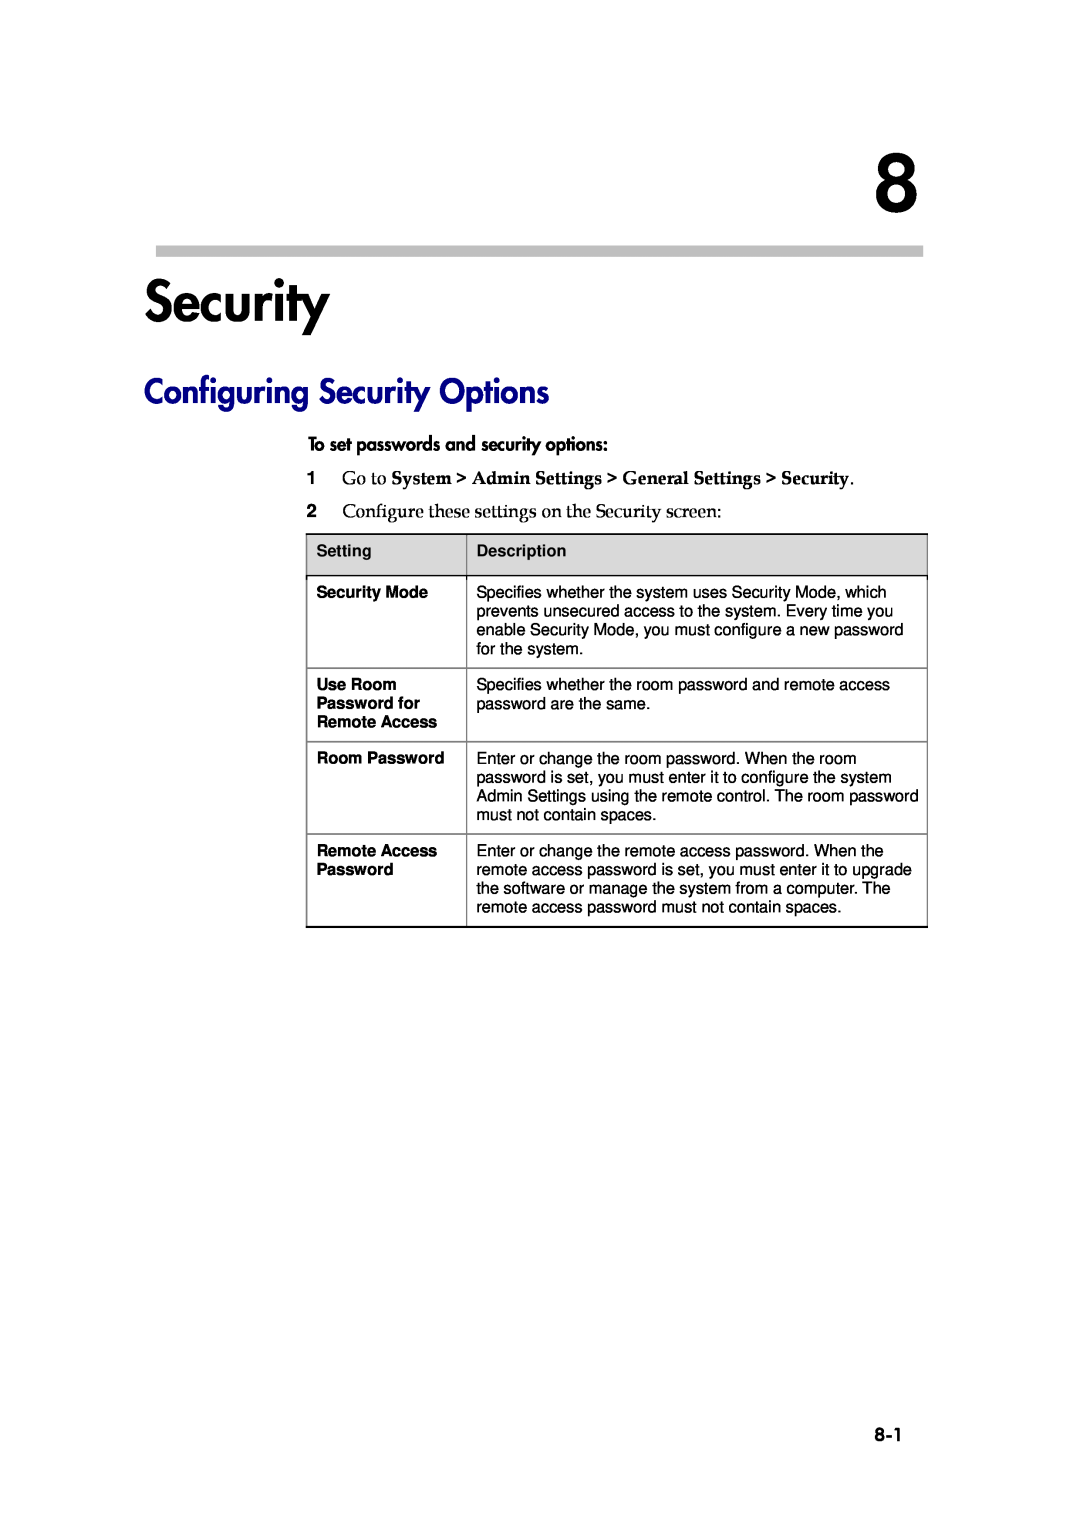 Polycom 6000 manual Configuring Security Options, To set passwords and security options 